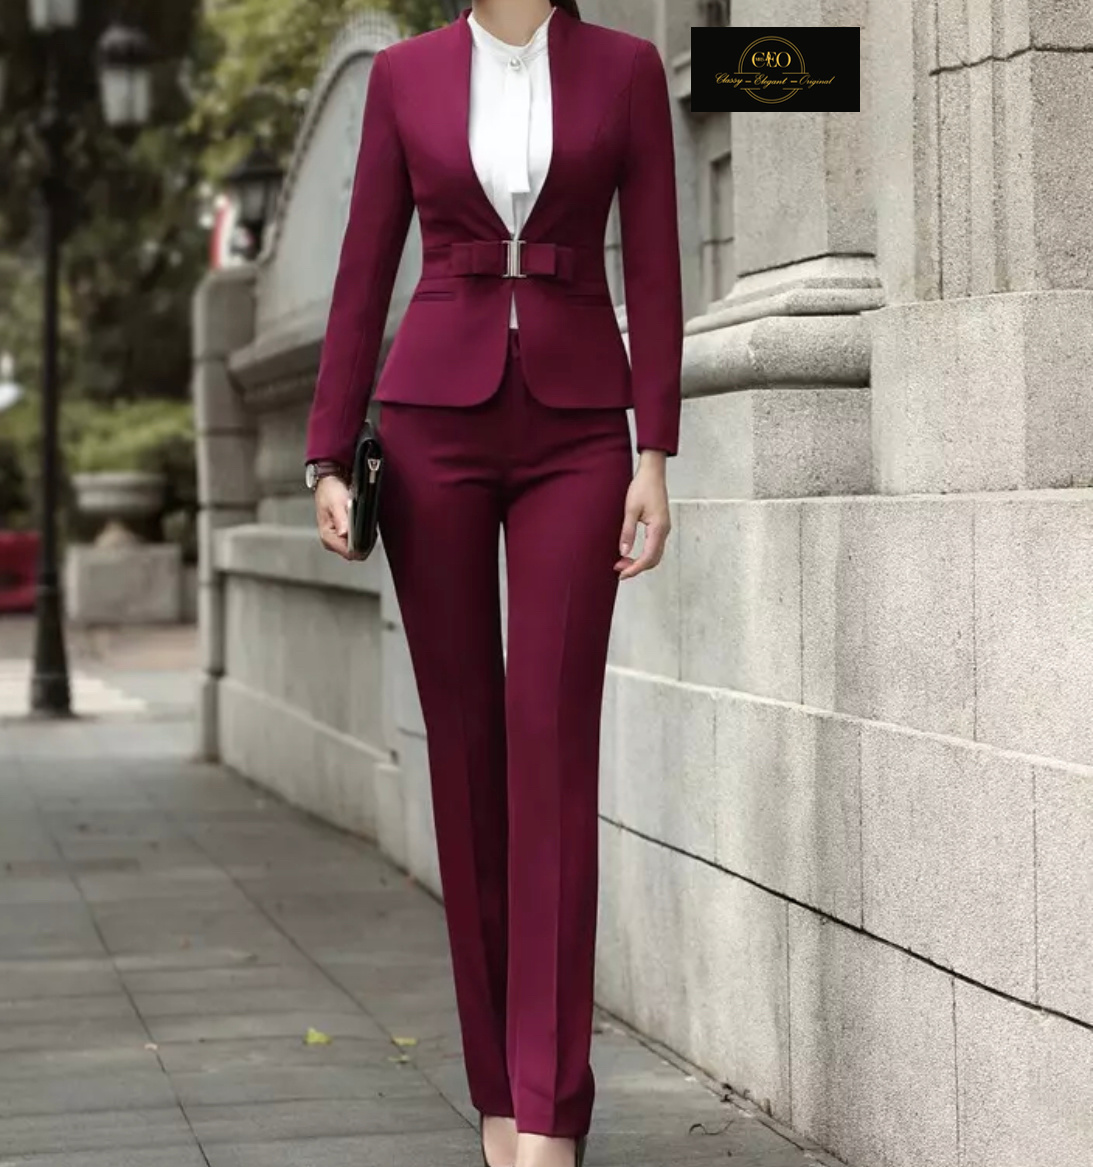 Brightly-coloured trouser suits from the high street %%page%% %%sep%%  %%sitename%% - The Mail